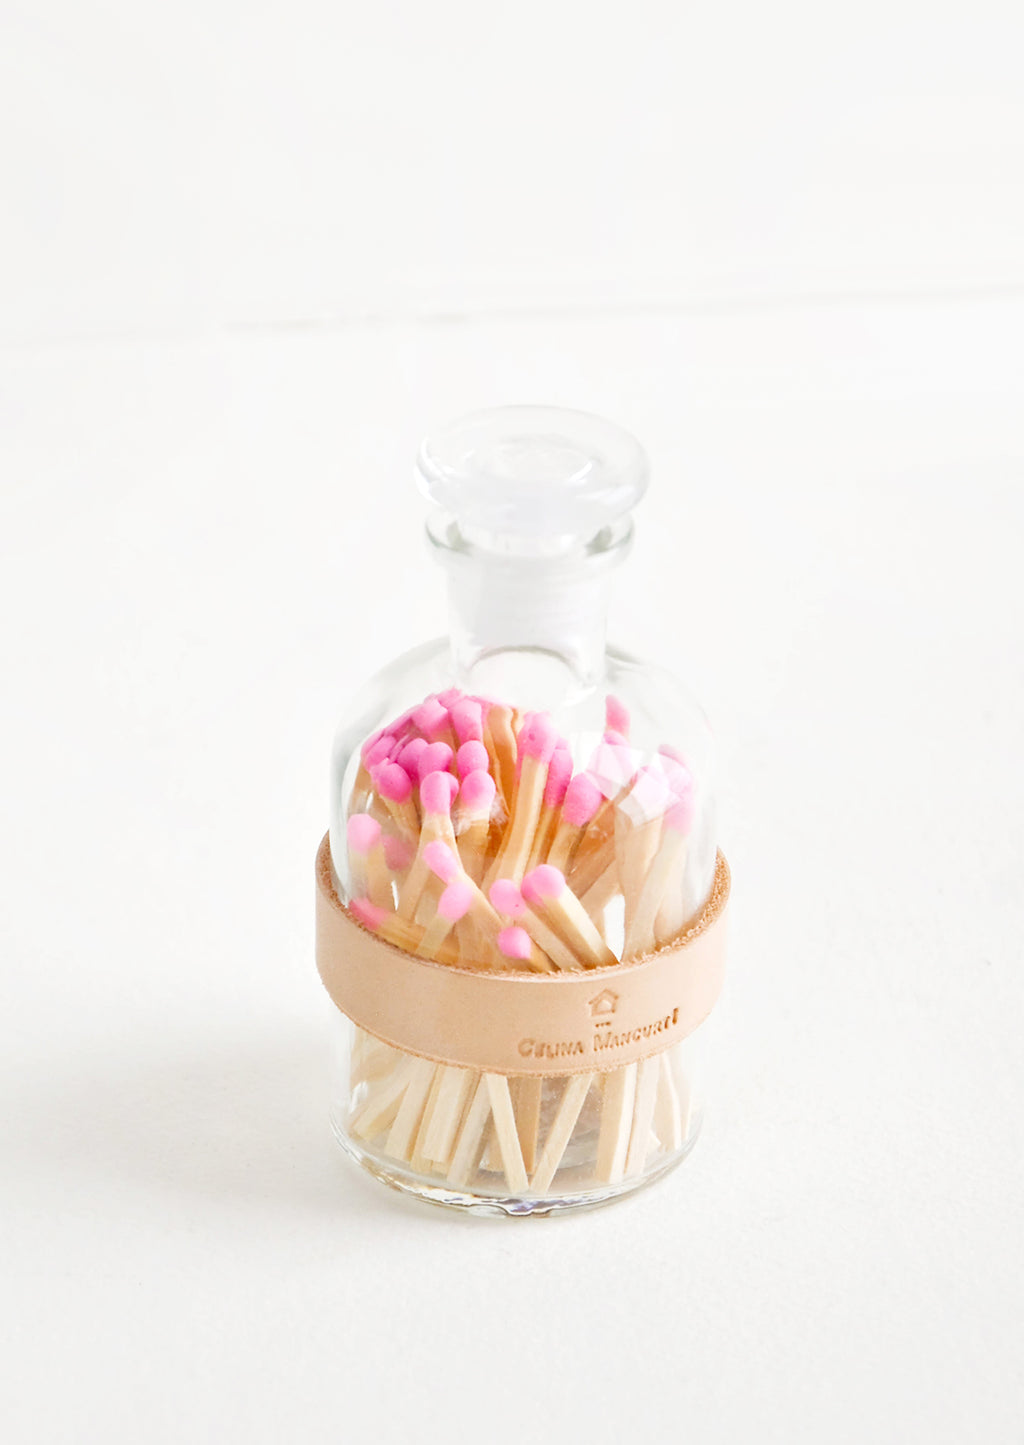 Blush: Leather Wrapped Match Jar in Blush - LEIF